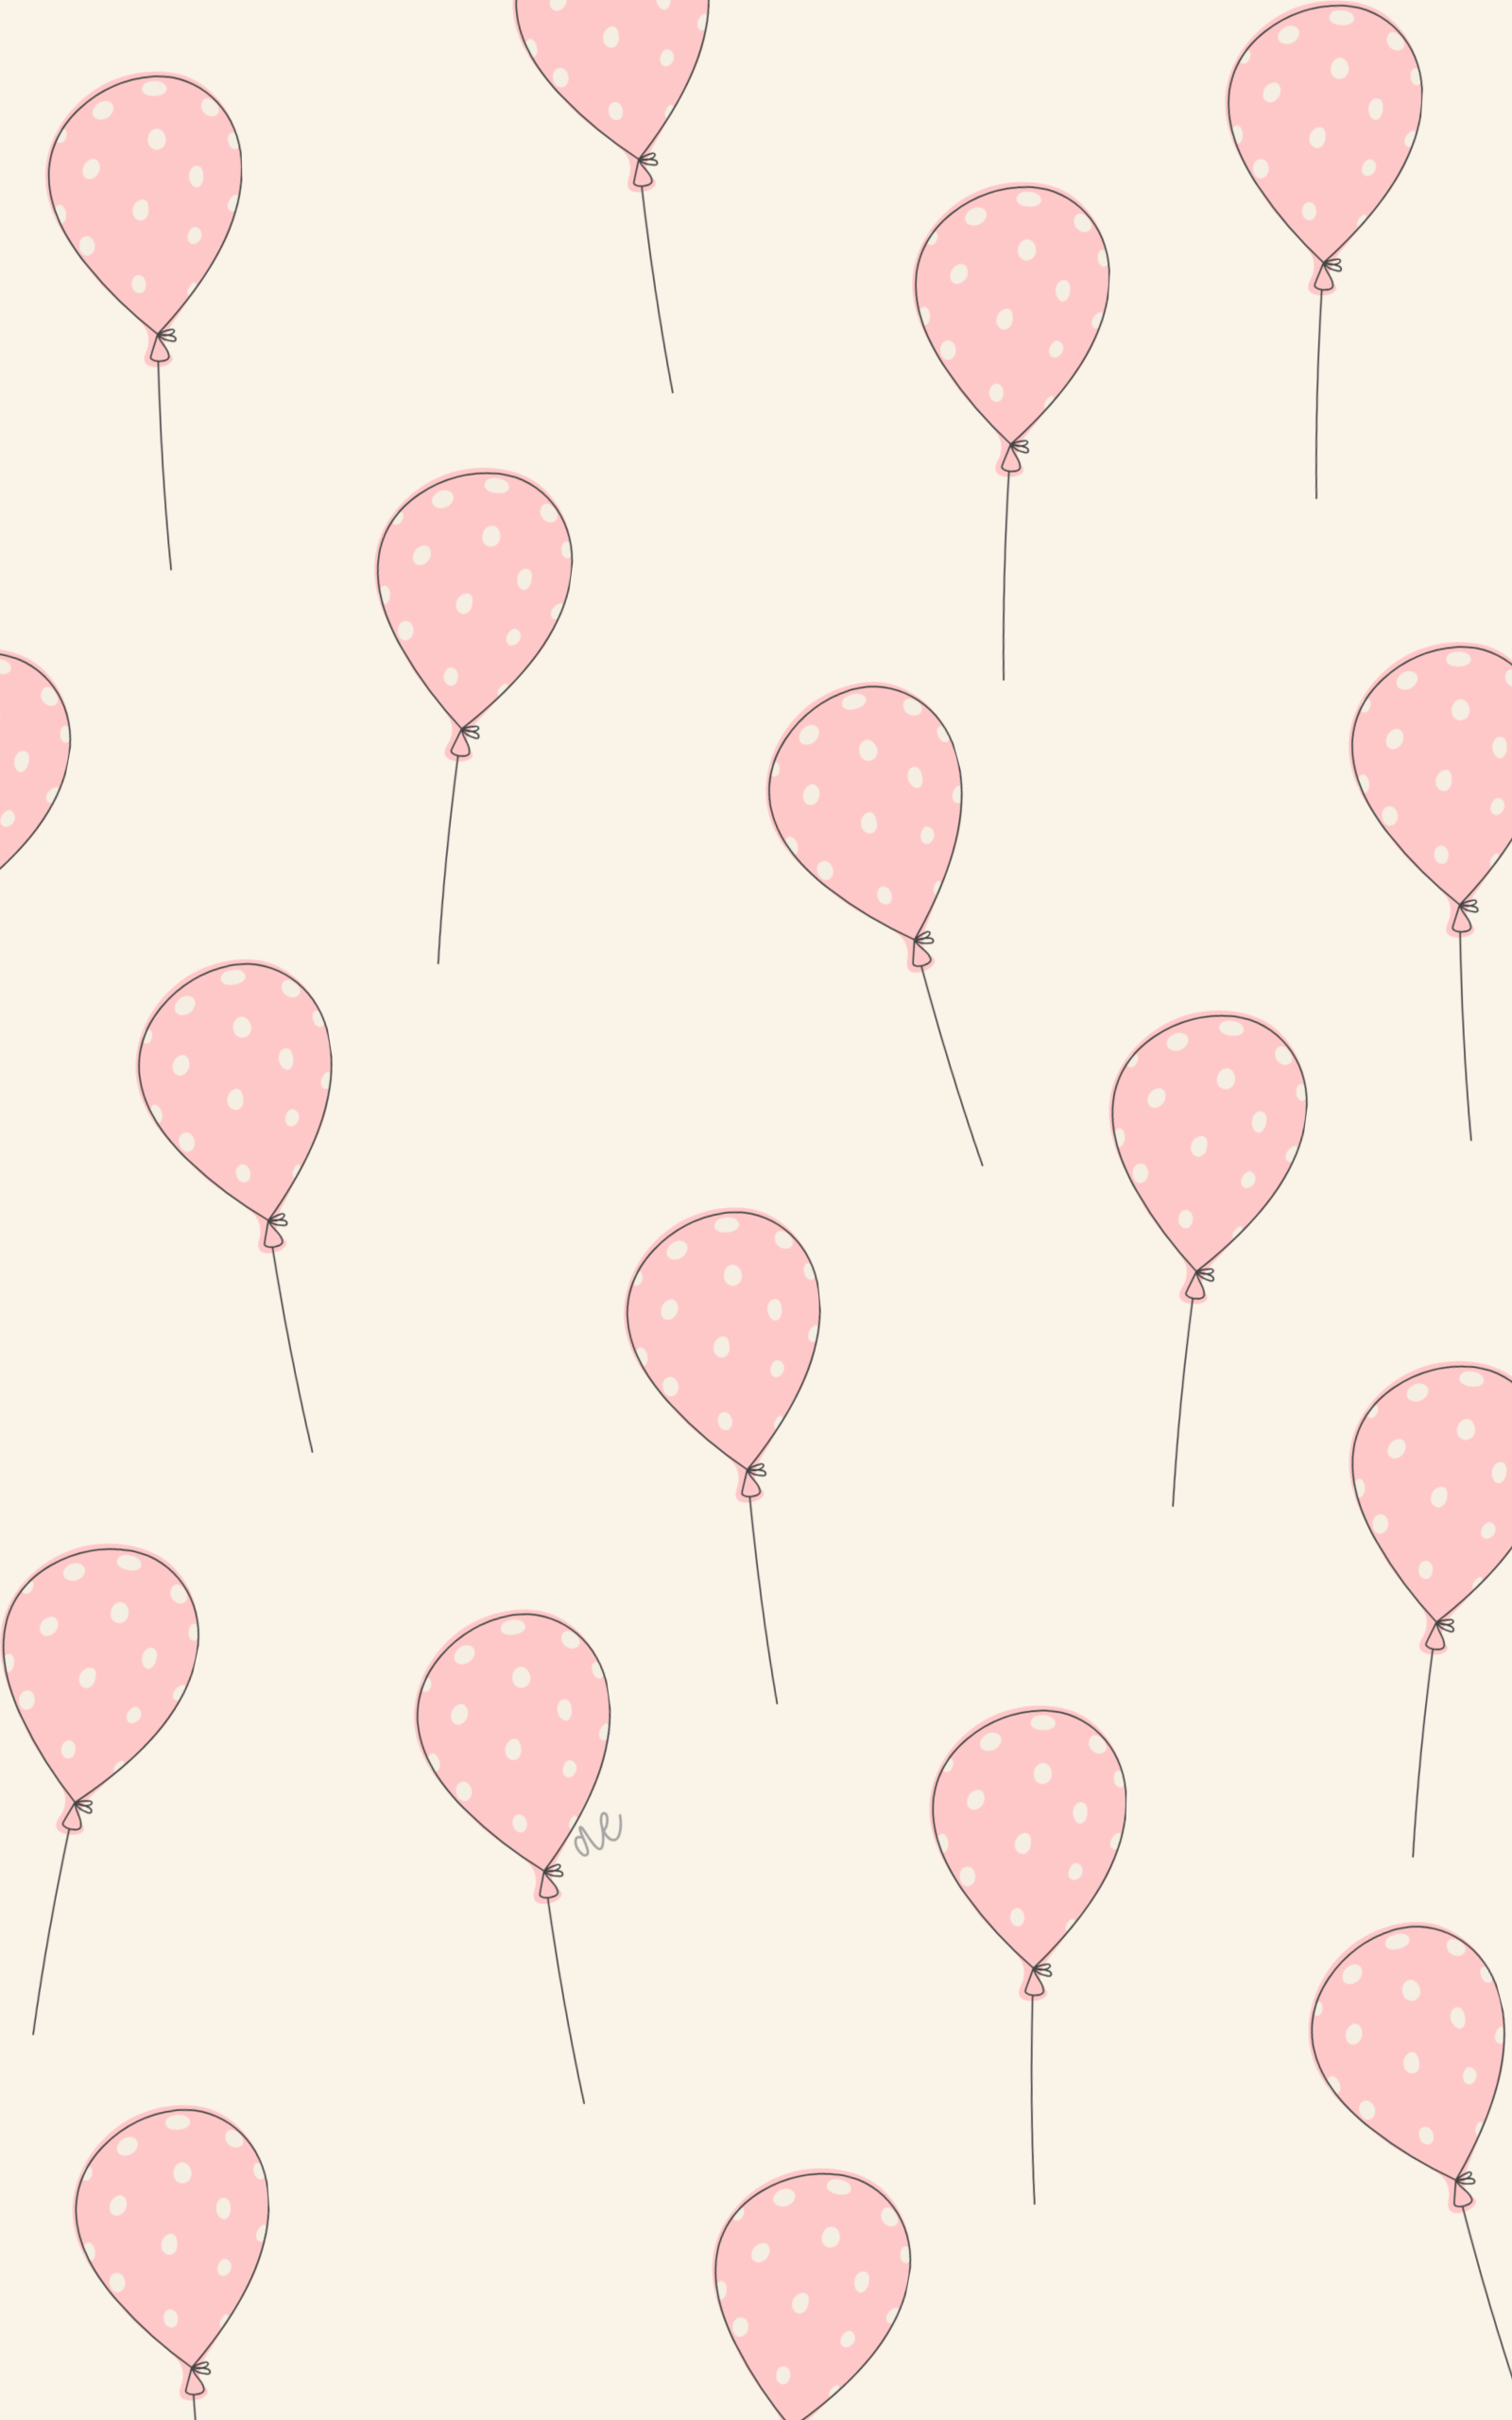 A pattern of pink balloons with white polka dots on a cream background - Birthday, balloons